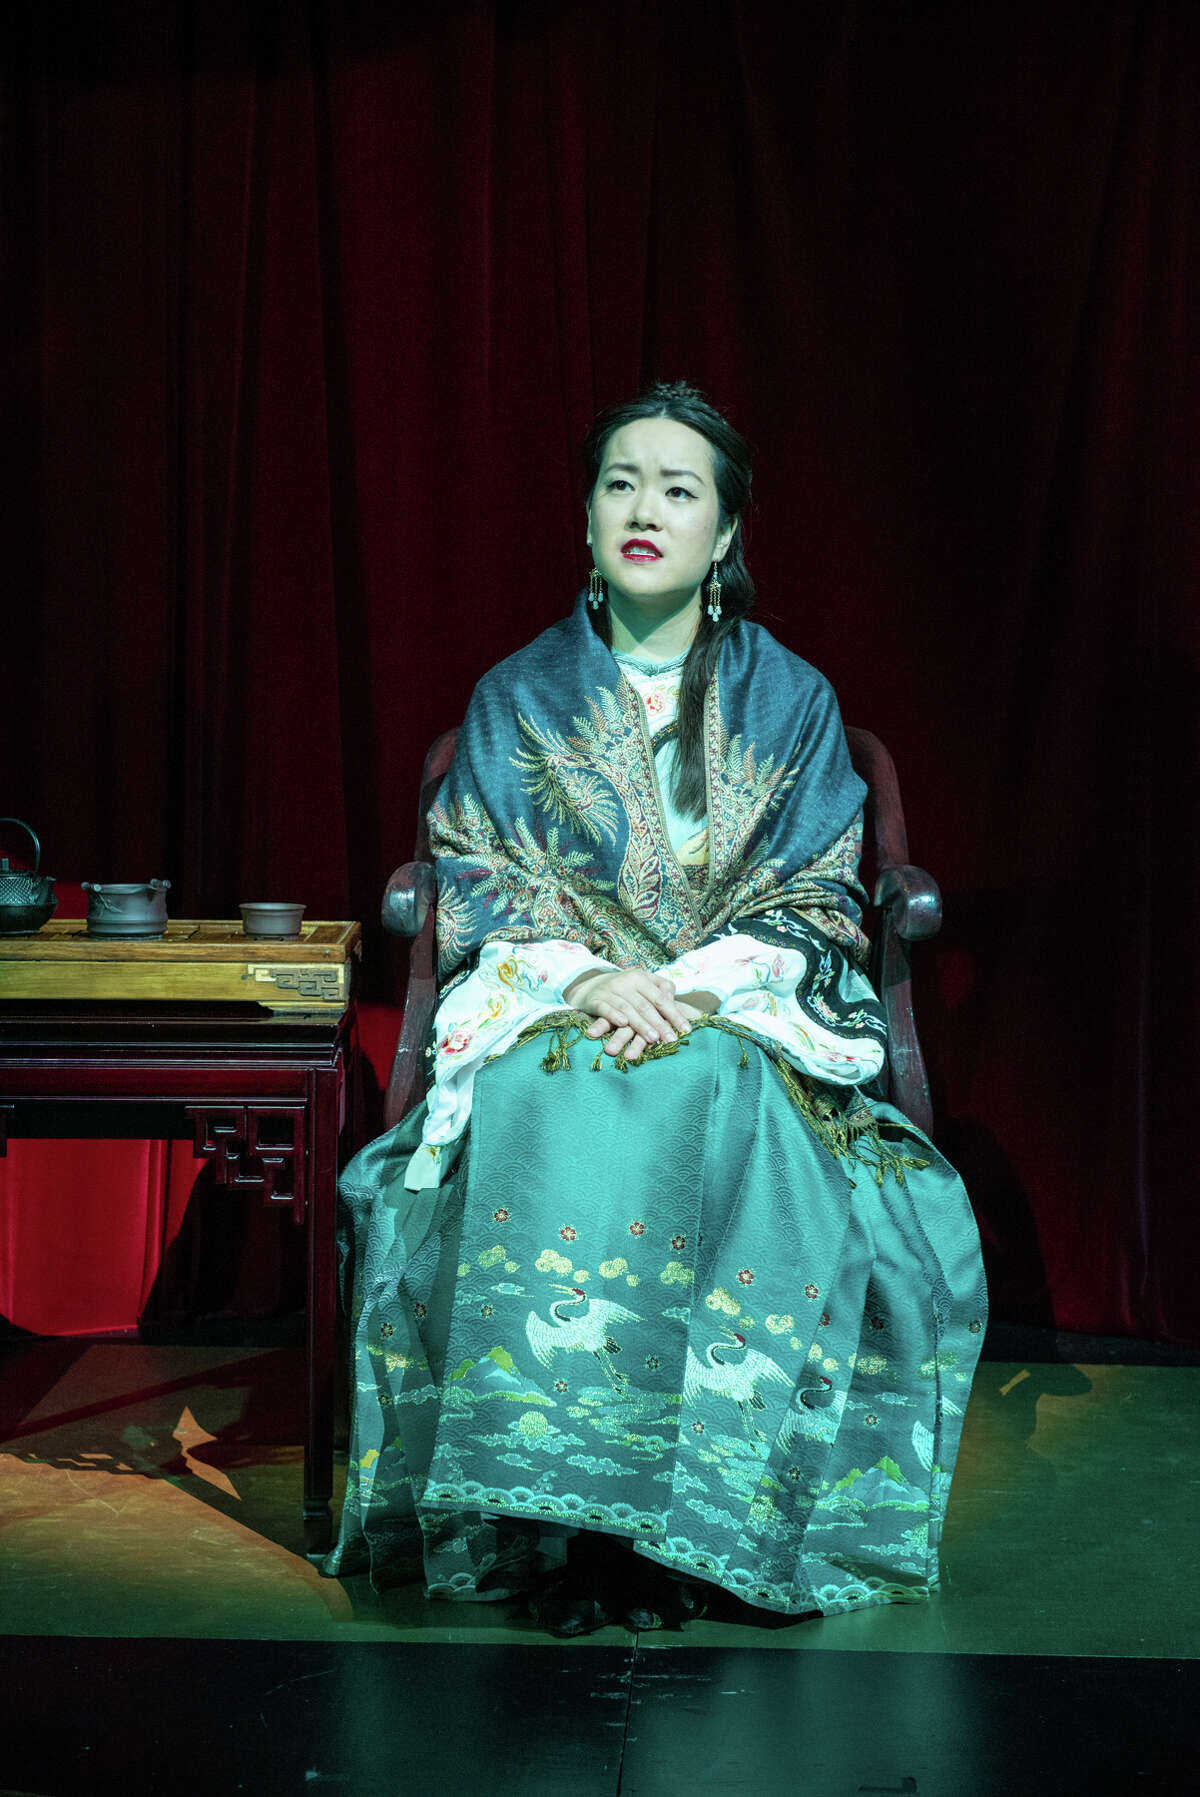 Sami Ma plays the title character in "The Chinese Lady," running through June 26, 2022, at Adirondack Theatre Festival in Glens Falls. It is the fictionalized version of the true story of the first Chinese woman in America, brought here as a 14-year-old in 1834 and put on display for decades.